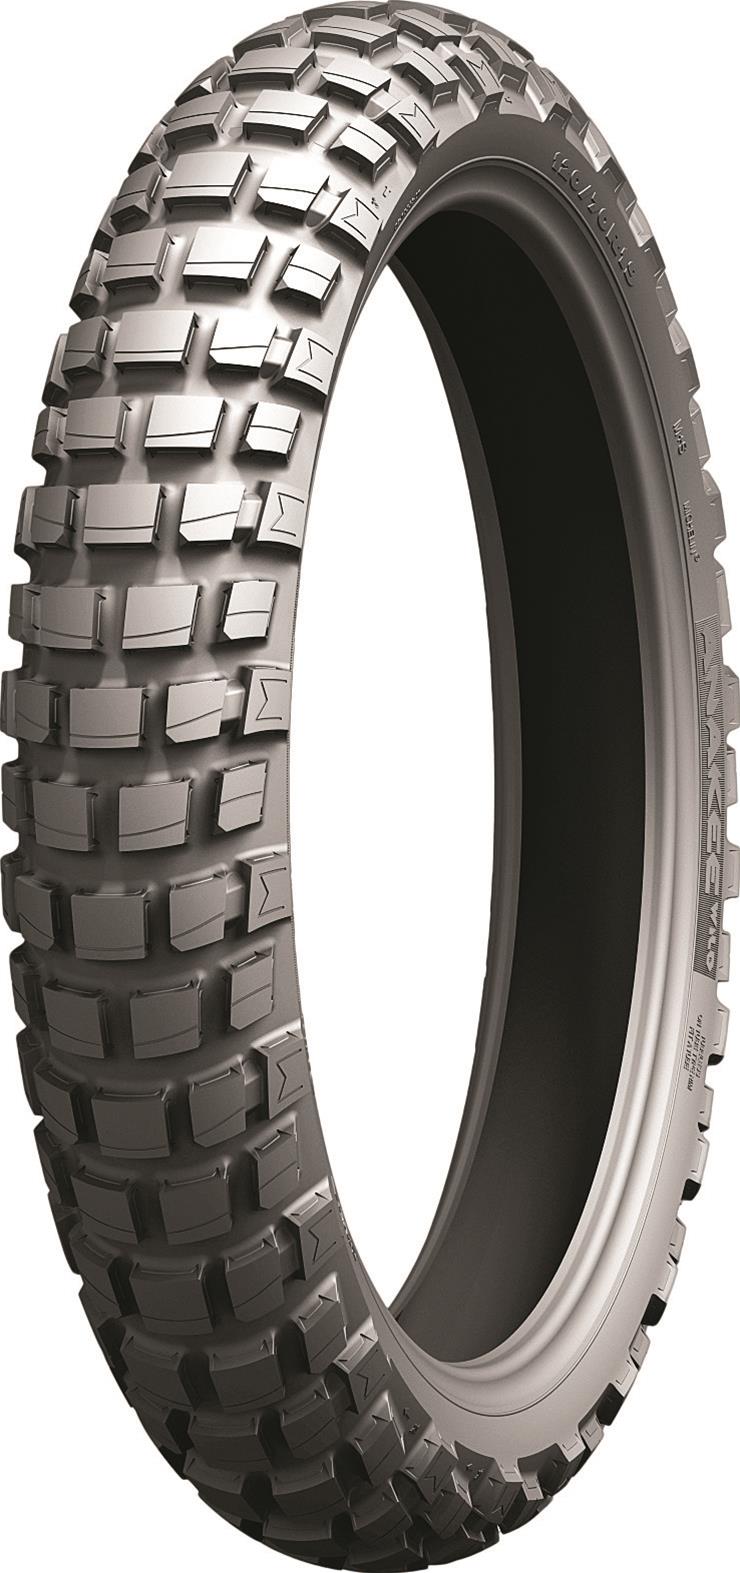 Michelin Motorcycle Tires 75639 Michelin Anakee Wild Tires | Summit Racing